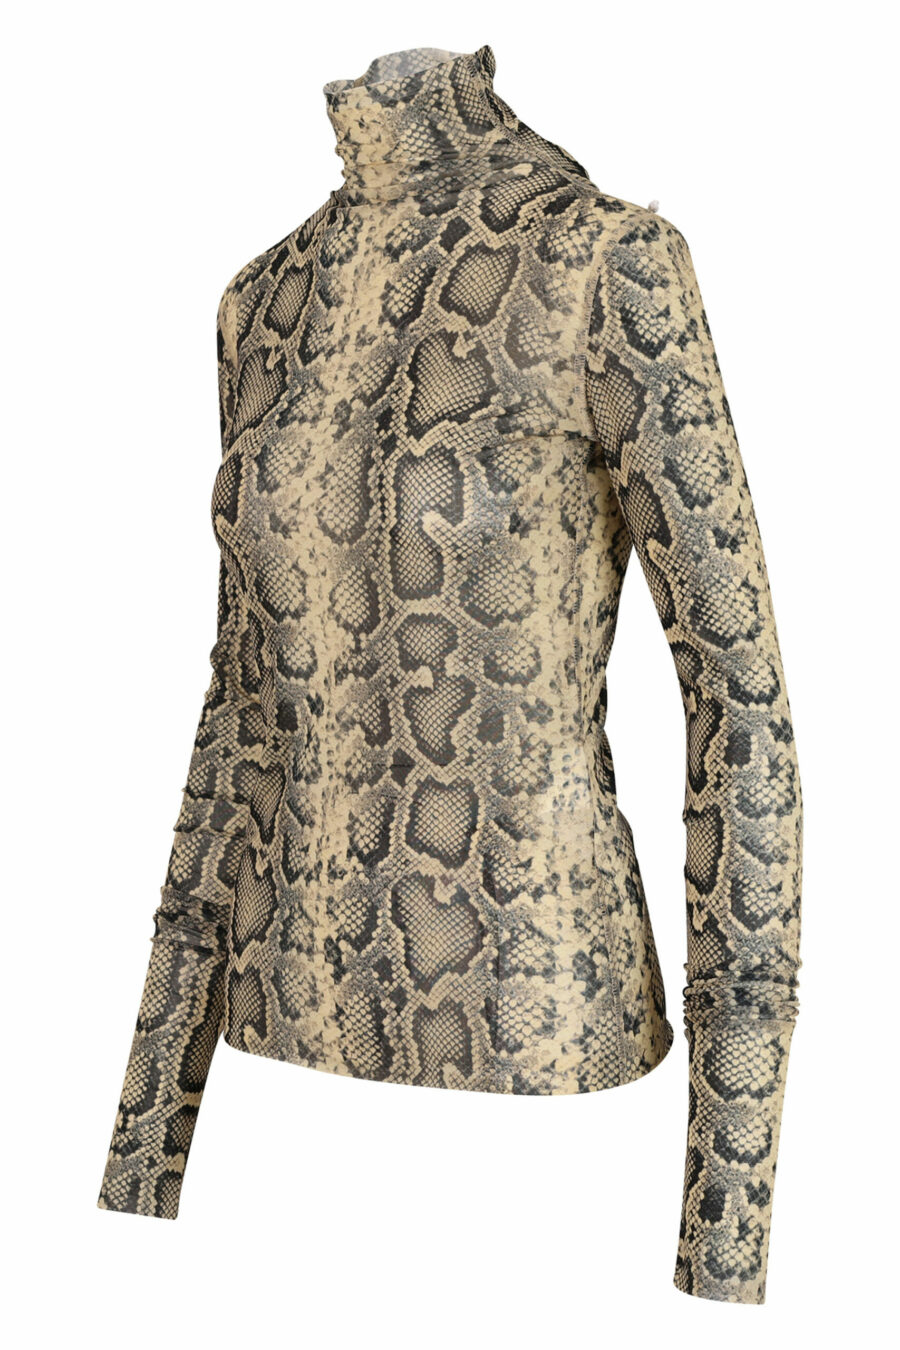 Beige T-shirt with snake print, long sleeves and semi-transparent - 8054943306899 1 scaled